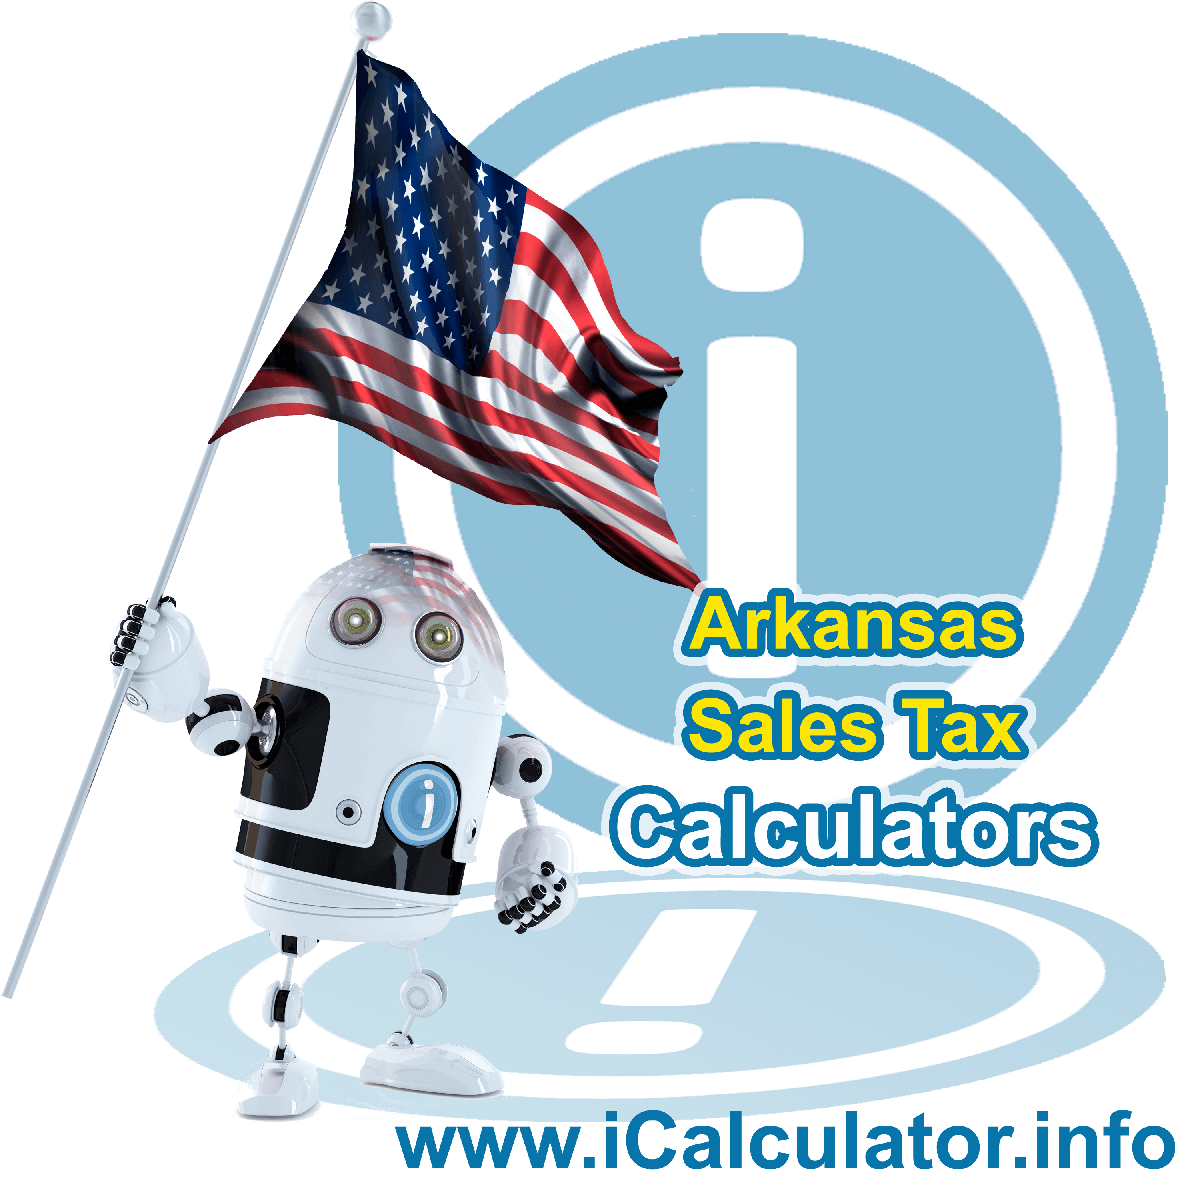 Cave Springs Sales Rates: This image illustrates a calculator robot calculating Cave Springs sales tax manually using the Cave Springs Sales Tax Formula. You can use this information to calculate Cave Springs Sales Tax manually or use the Cave Springs Sales Tax Calculator to calculate sales tax online.